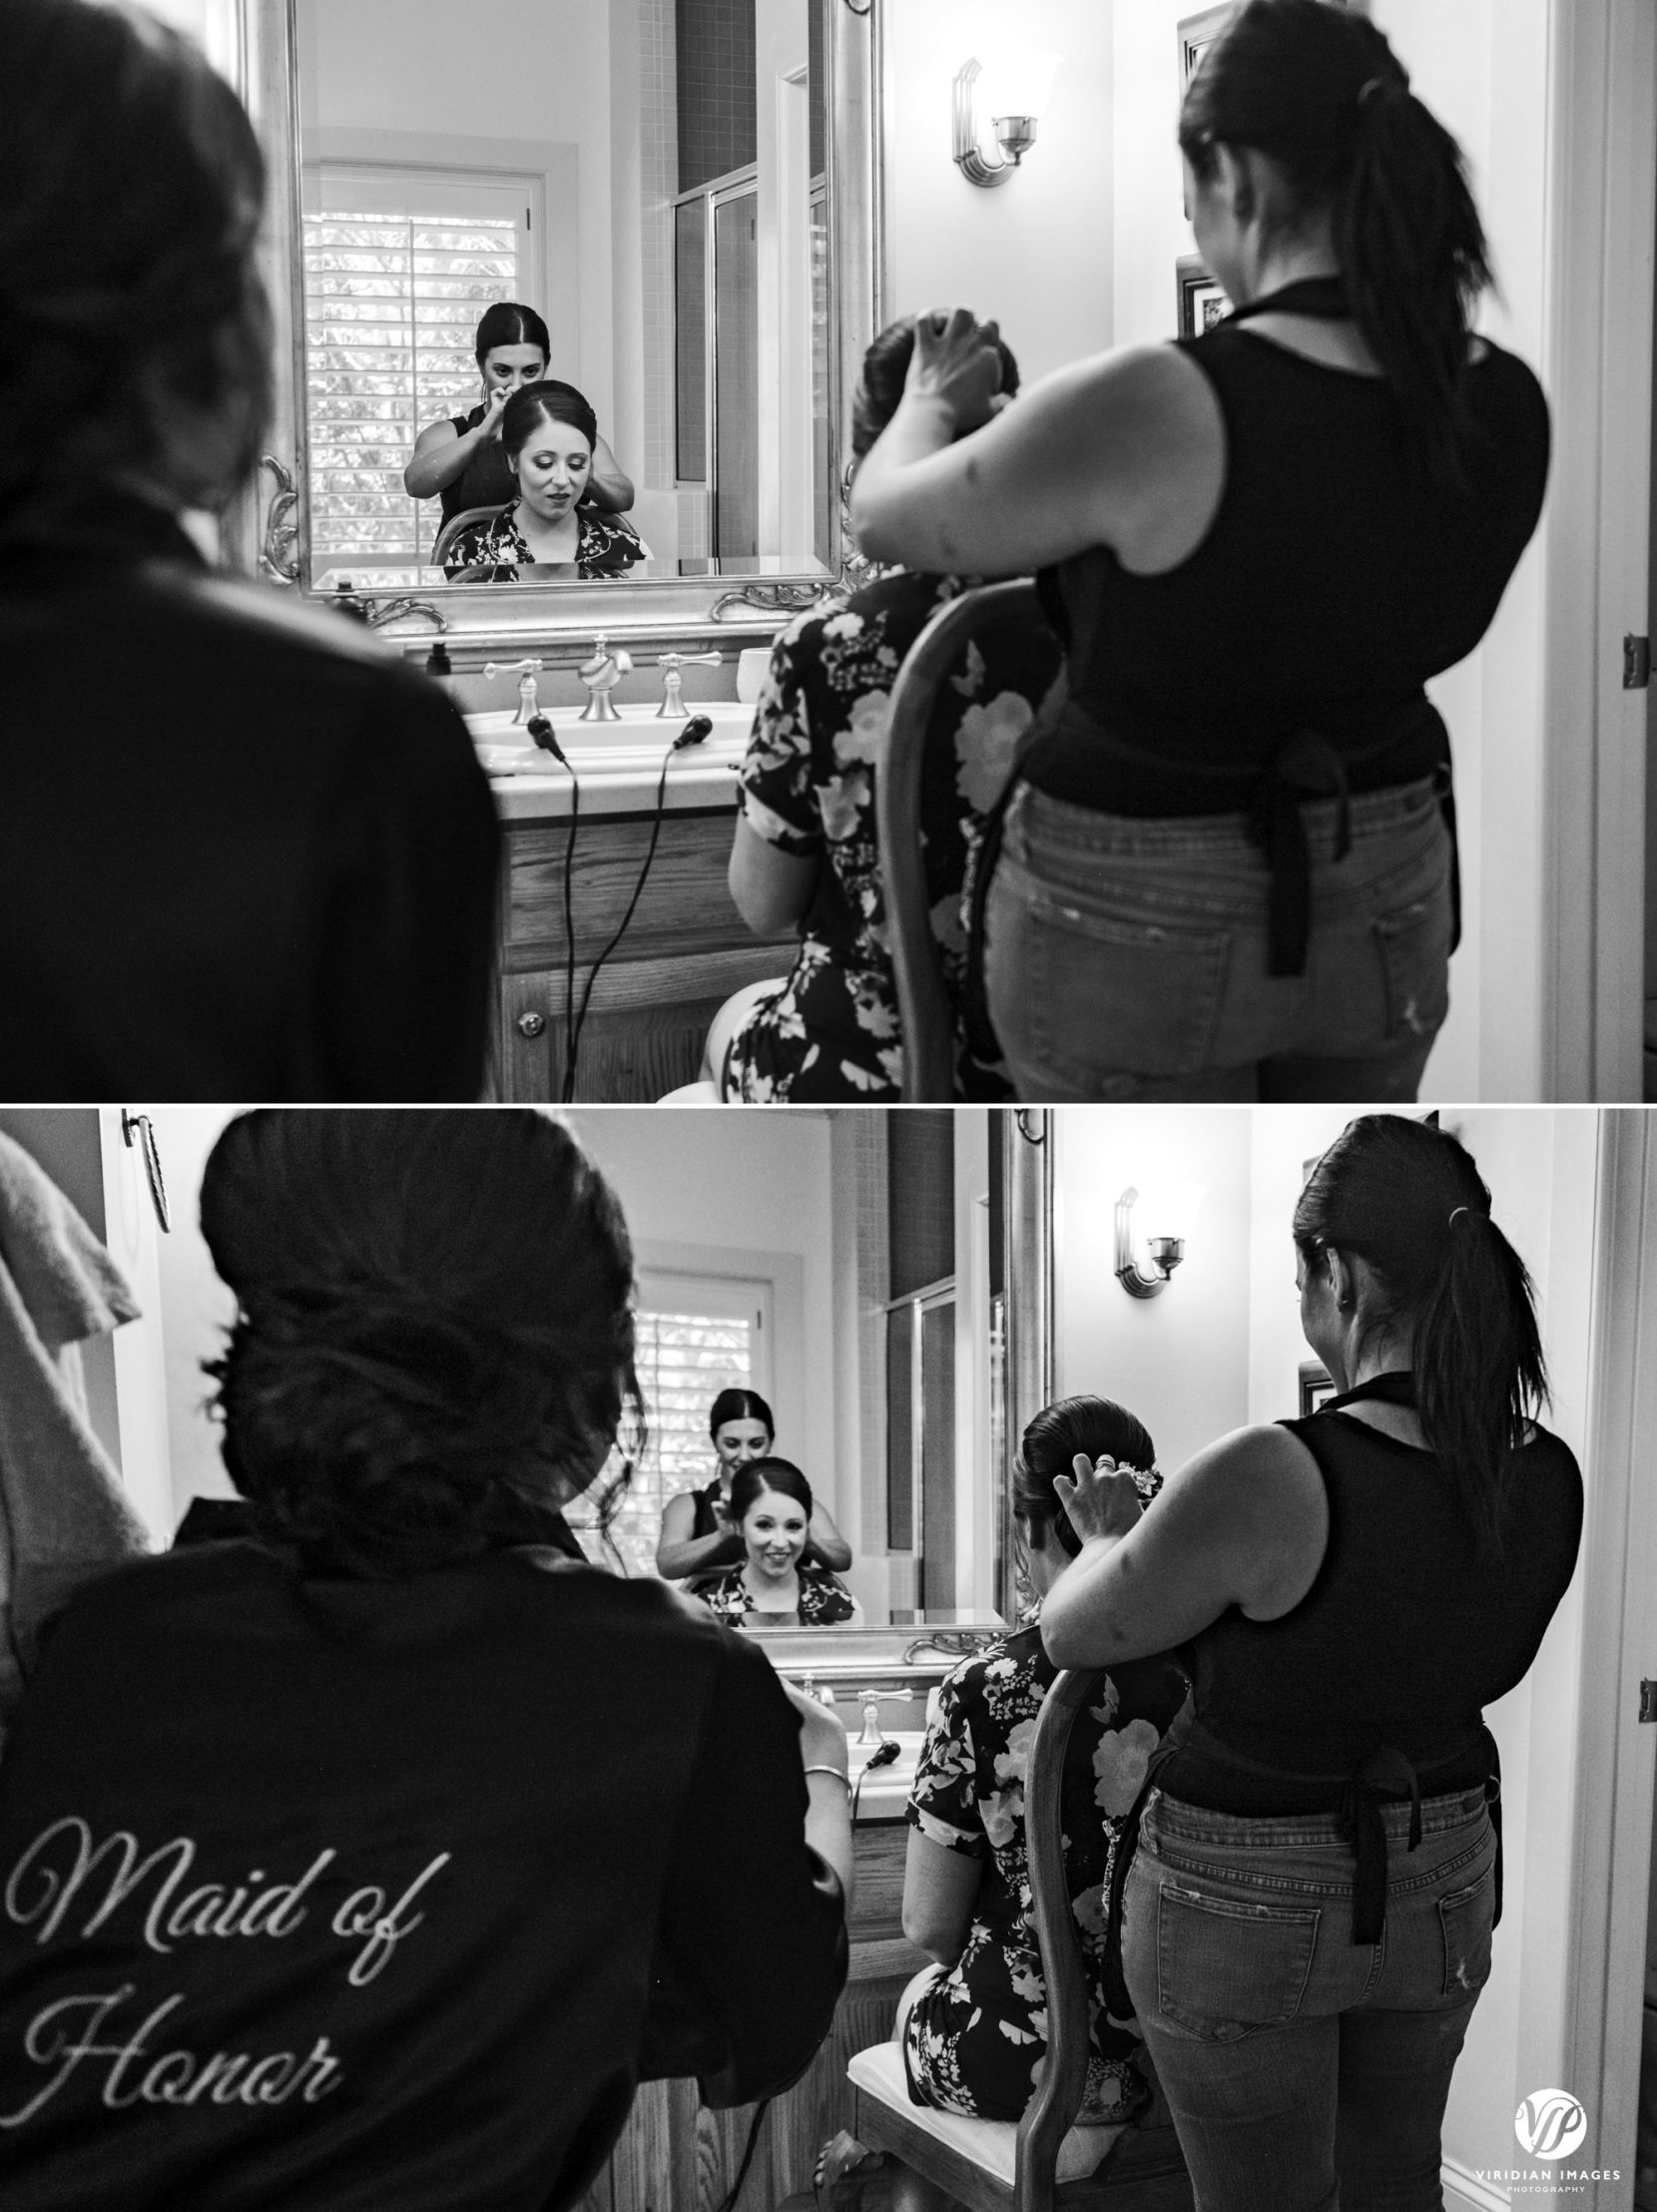 reflection of bride getting ready with maid of honor in foreground.